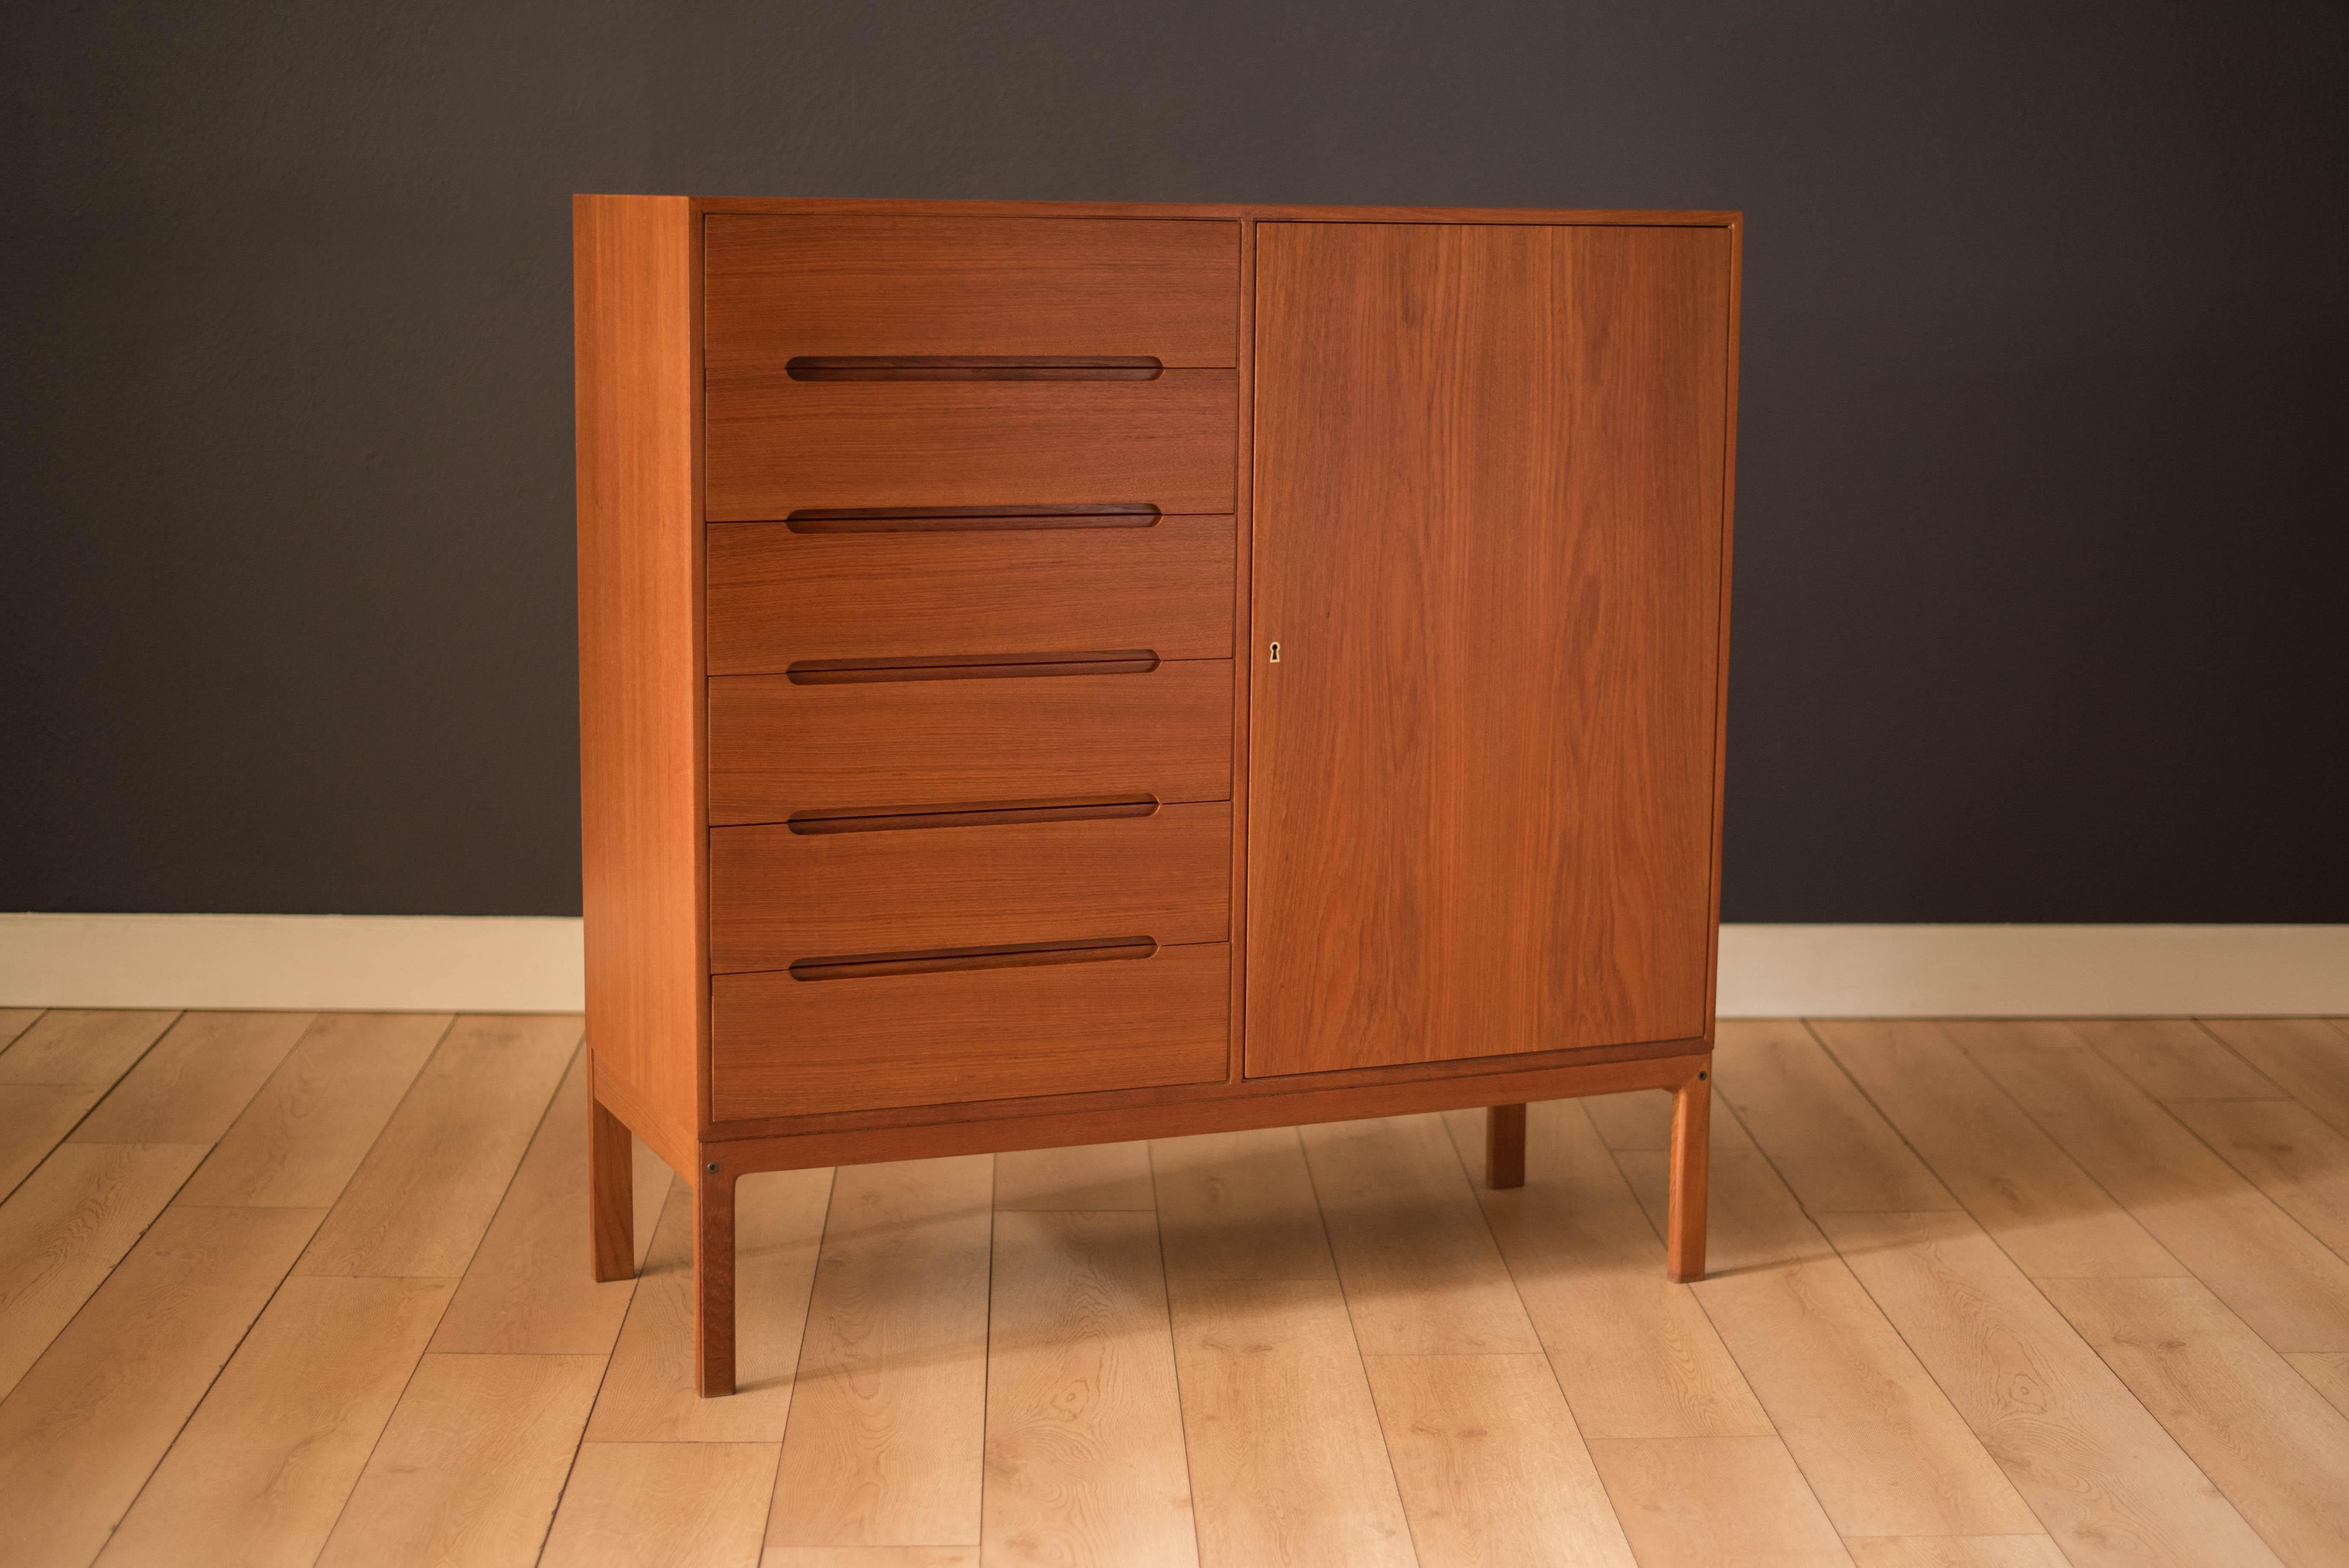 Mid-century dresser chest in teak designed by Arne Wahl Iversen for Vinde Møbelfabrik. This piece offers plenty of storage including six dovetailed drawers with inset sculpted handles. A locking cabinet door provides an additional six smaller